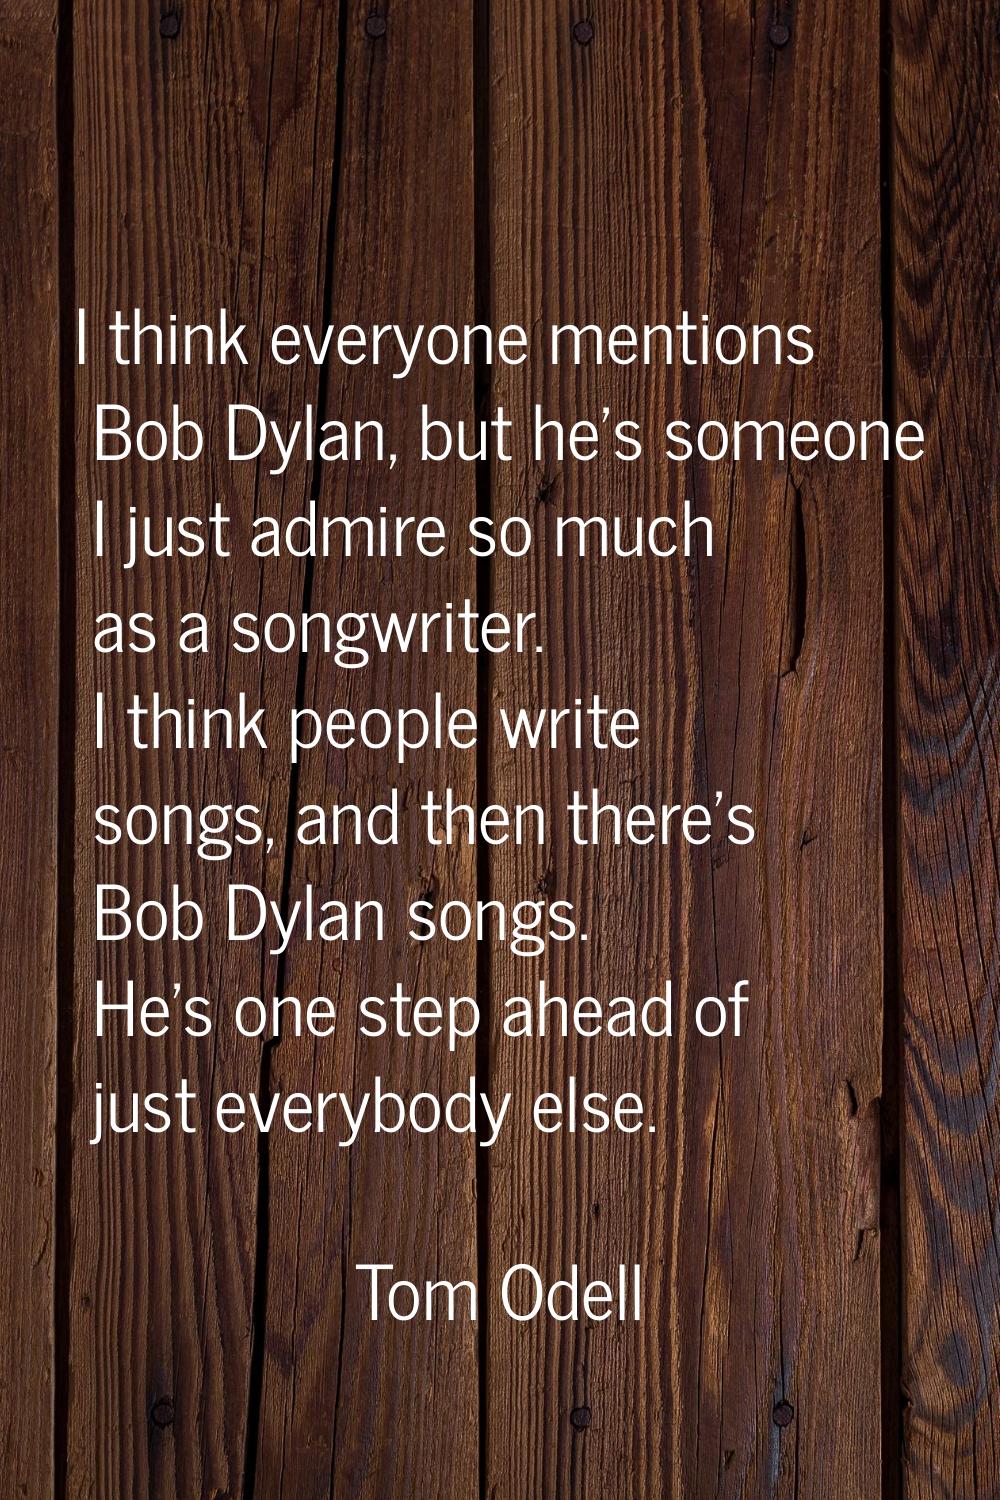 I think everyone mentions Bob Dylan, but he's someone I just admire so much as a songwriter. I thin